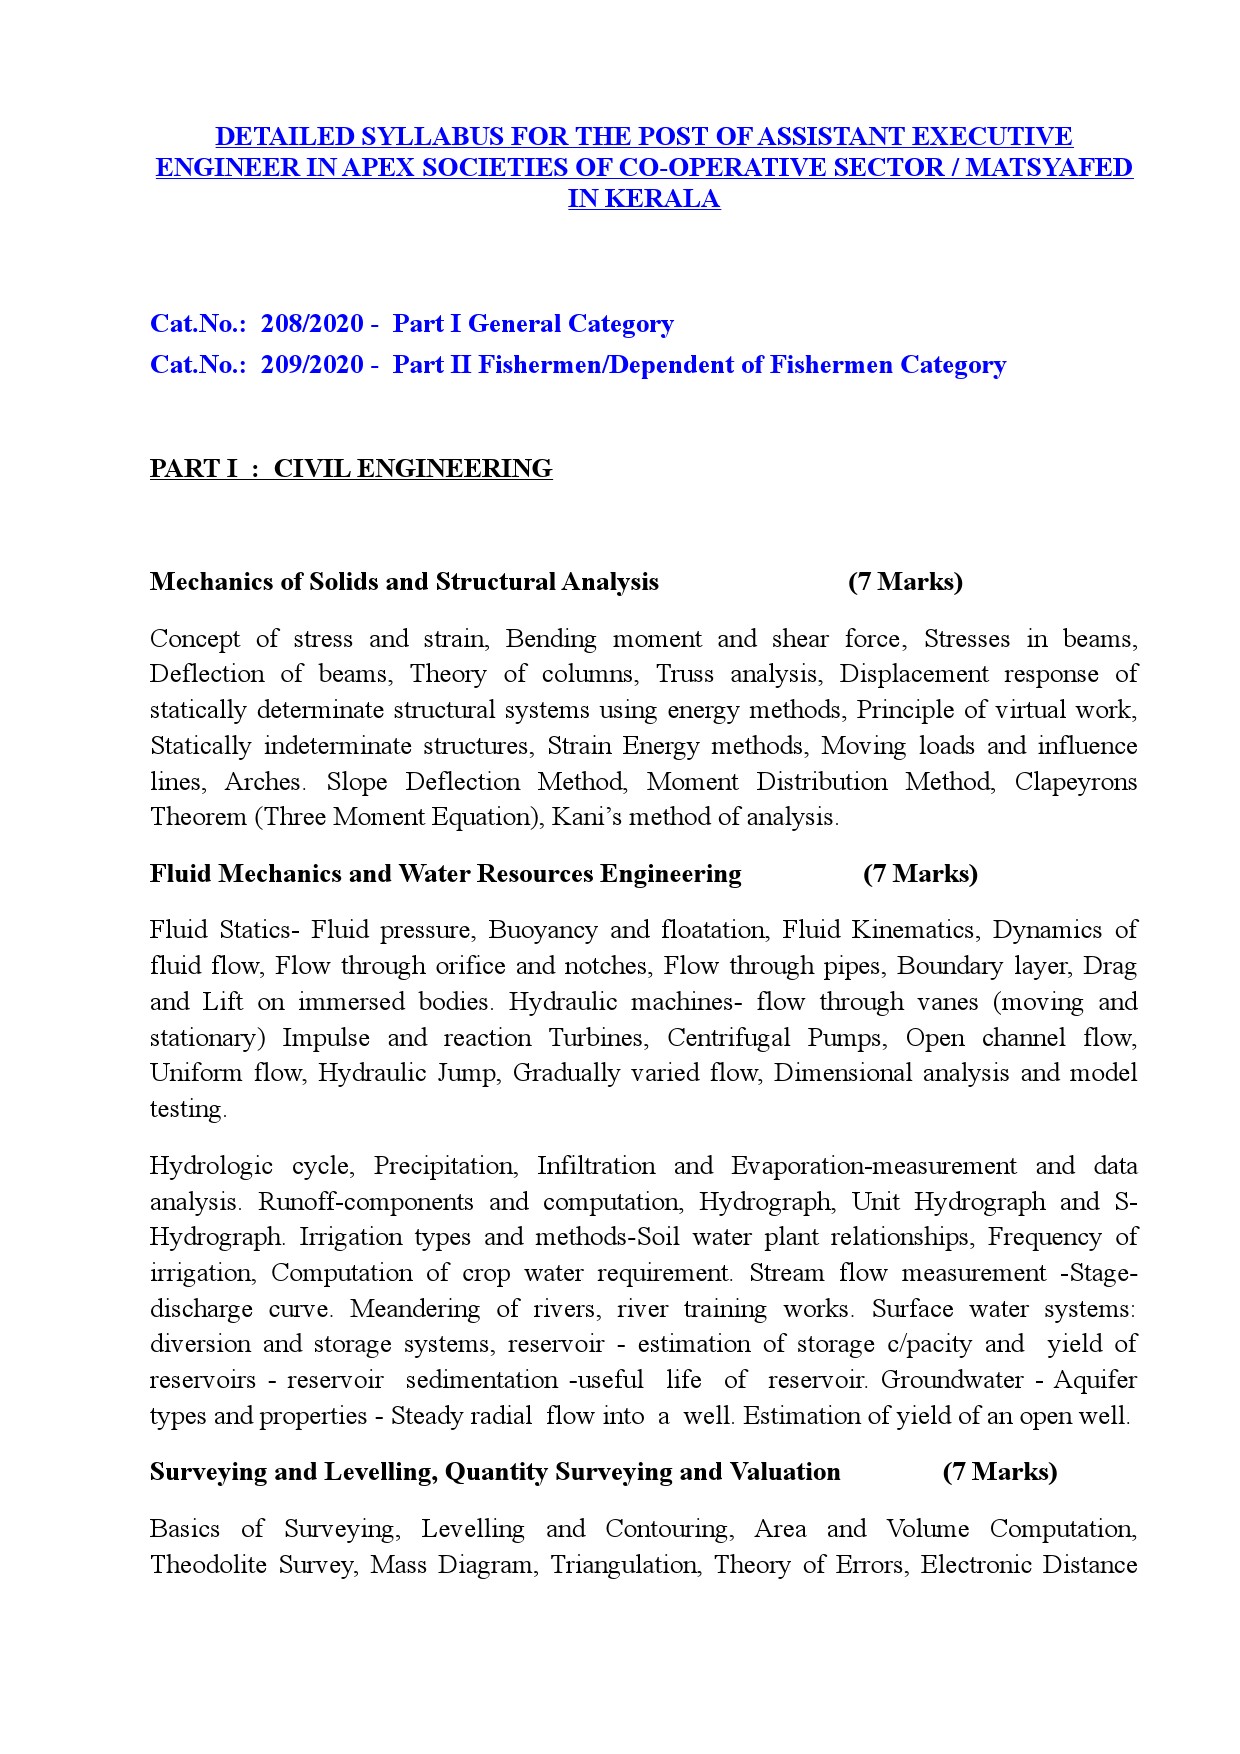 KPSC SYLLABUS FOR THE POST OF ASSISTANT EXECUTIVE ENGINEER - Notification Image 1